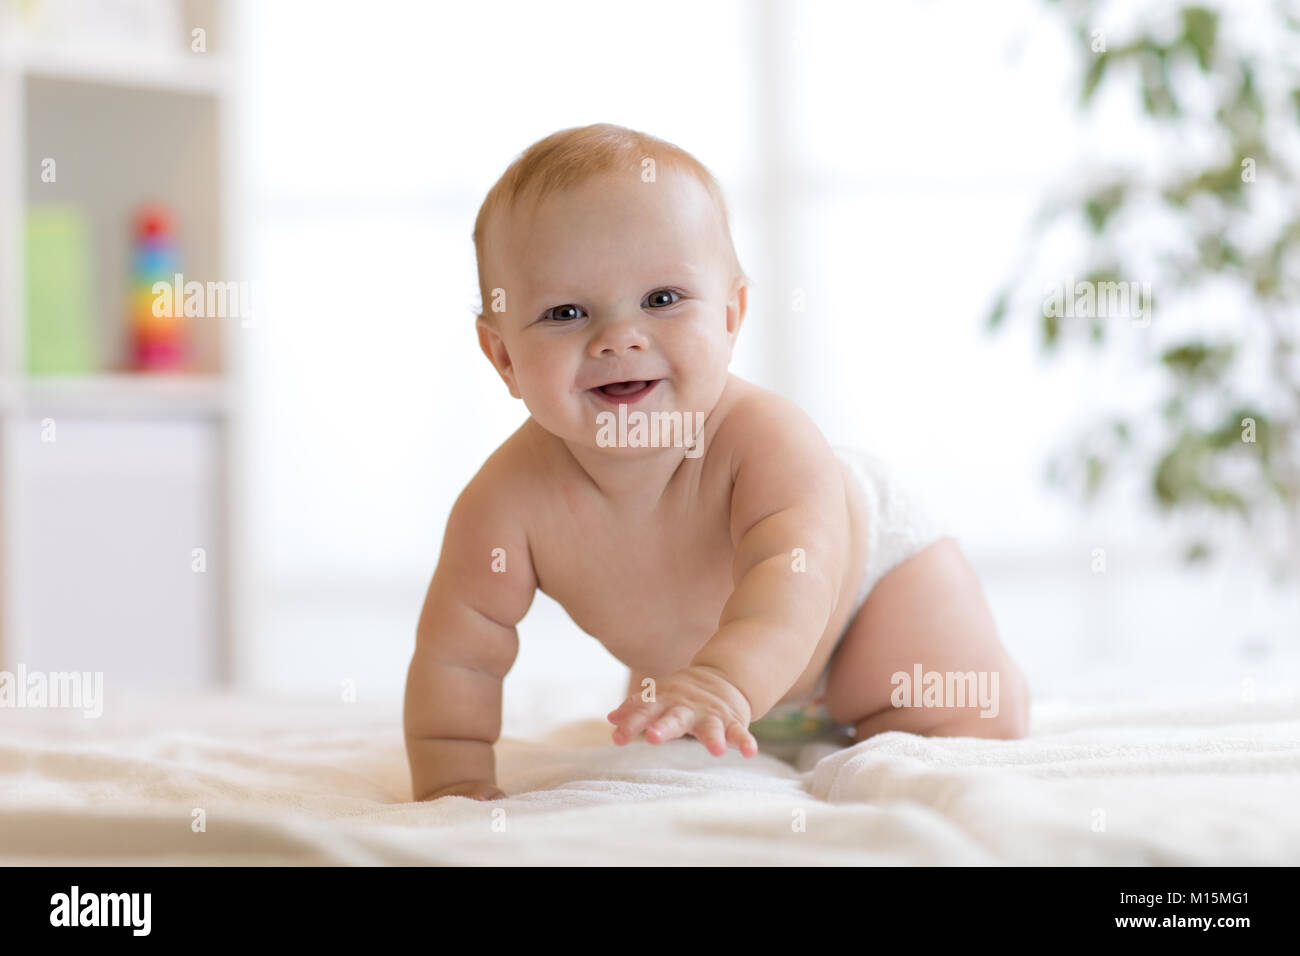 funny baby boy weared diaper crawling on bed at home Stock Photo